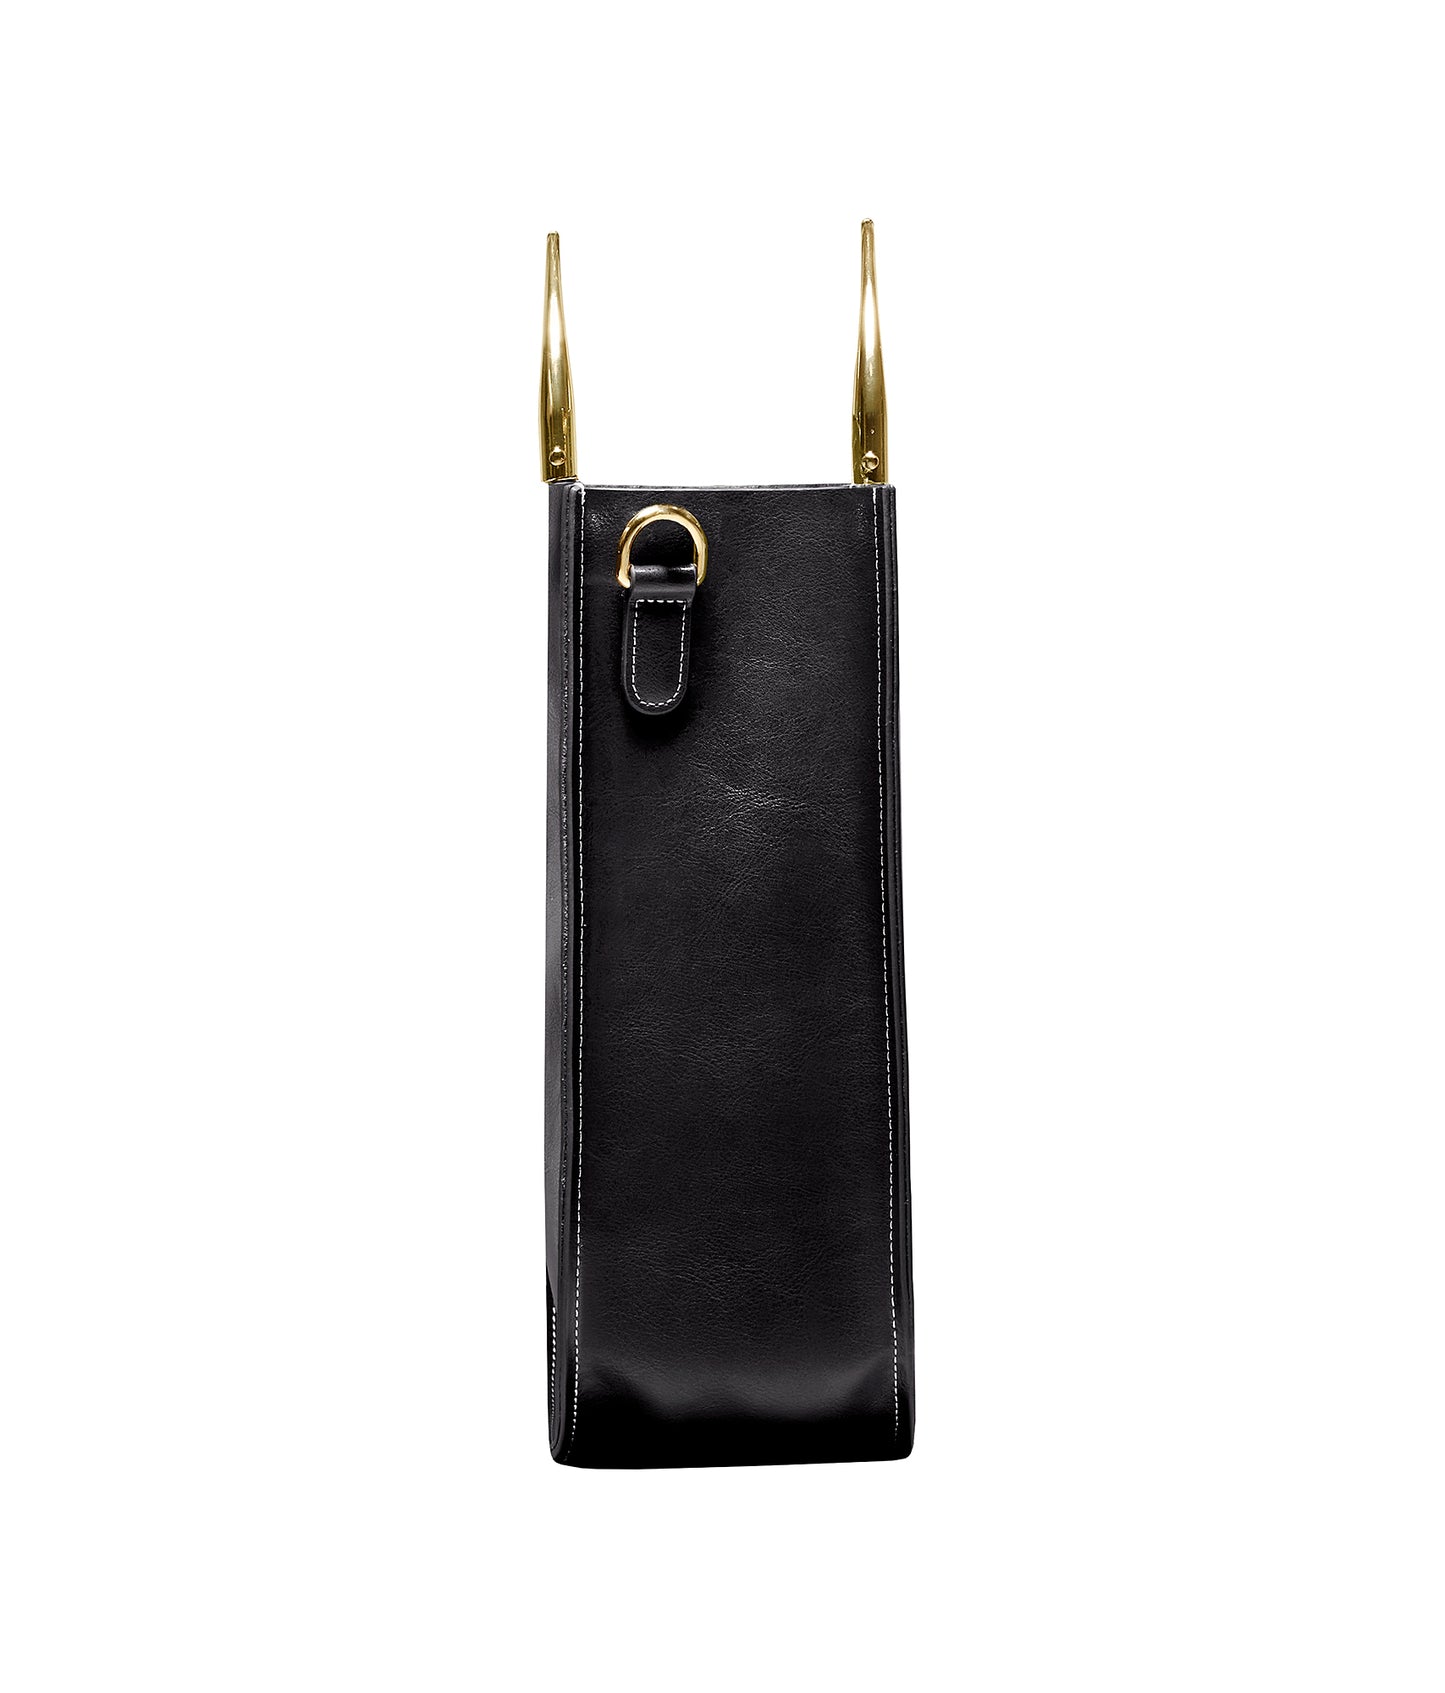 Soft Leather Tote in Sleek Black-Gold Handle